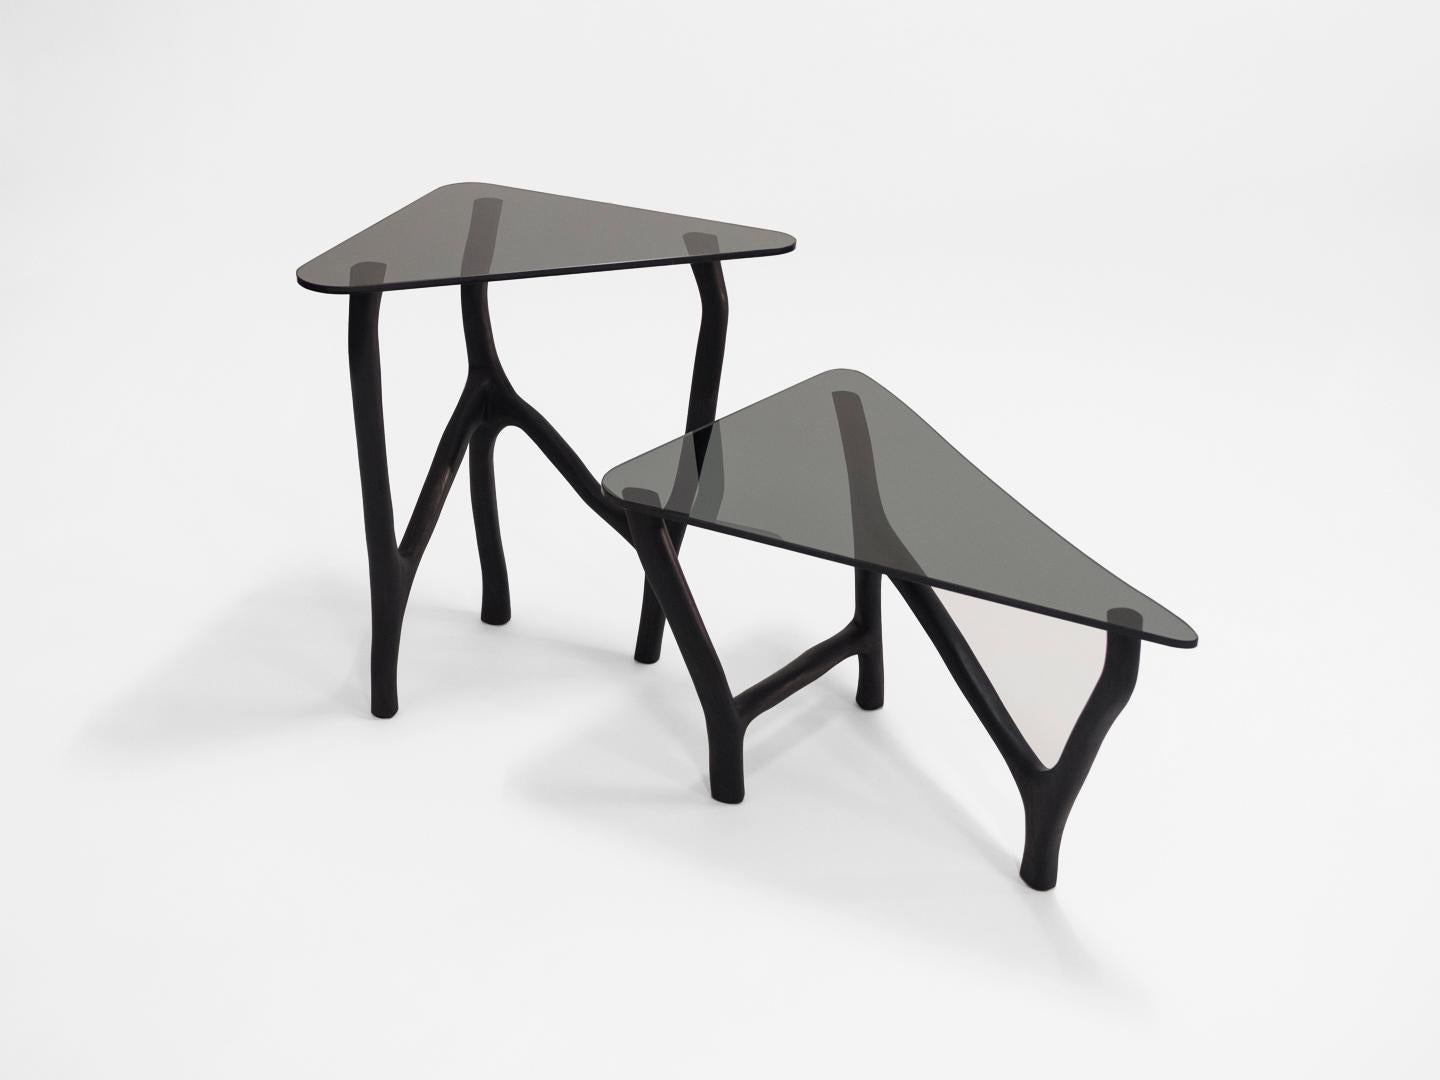 Black Side Tables by Robin Berrewaerts
Materials: Ebonized oak - dark grey glass - oil finish
Dimensions: W 35, D 40, H 76 (high)
Dimensions: W 70, D 50, H 40 (low)

Robin Berrewaerts was born in 1991, he works and lives in Brussels, Belgium.